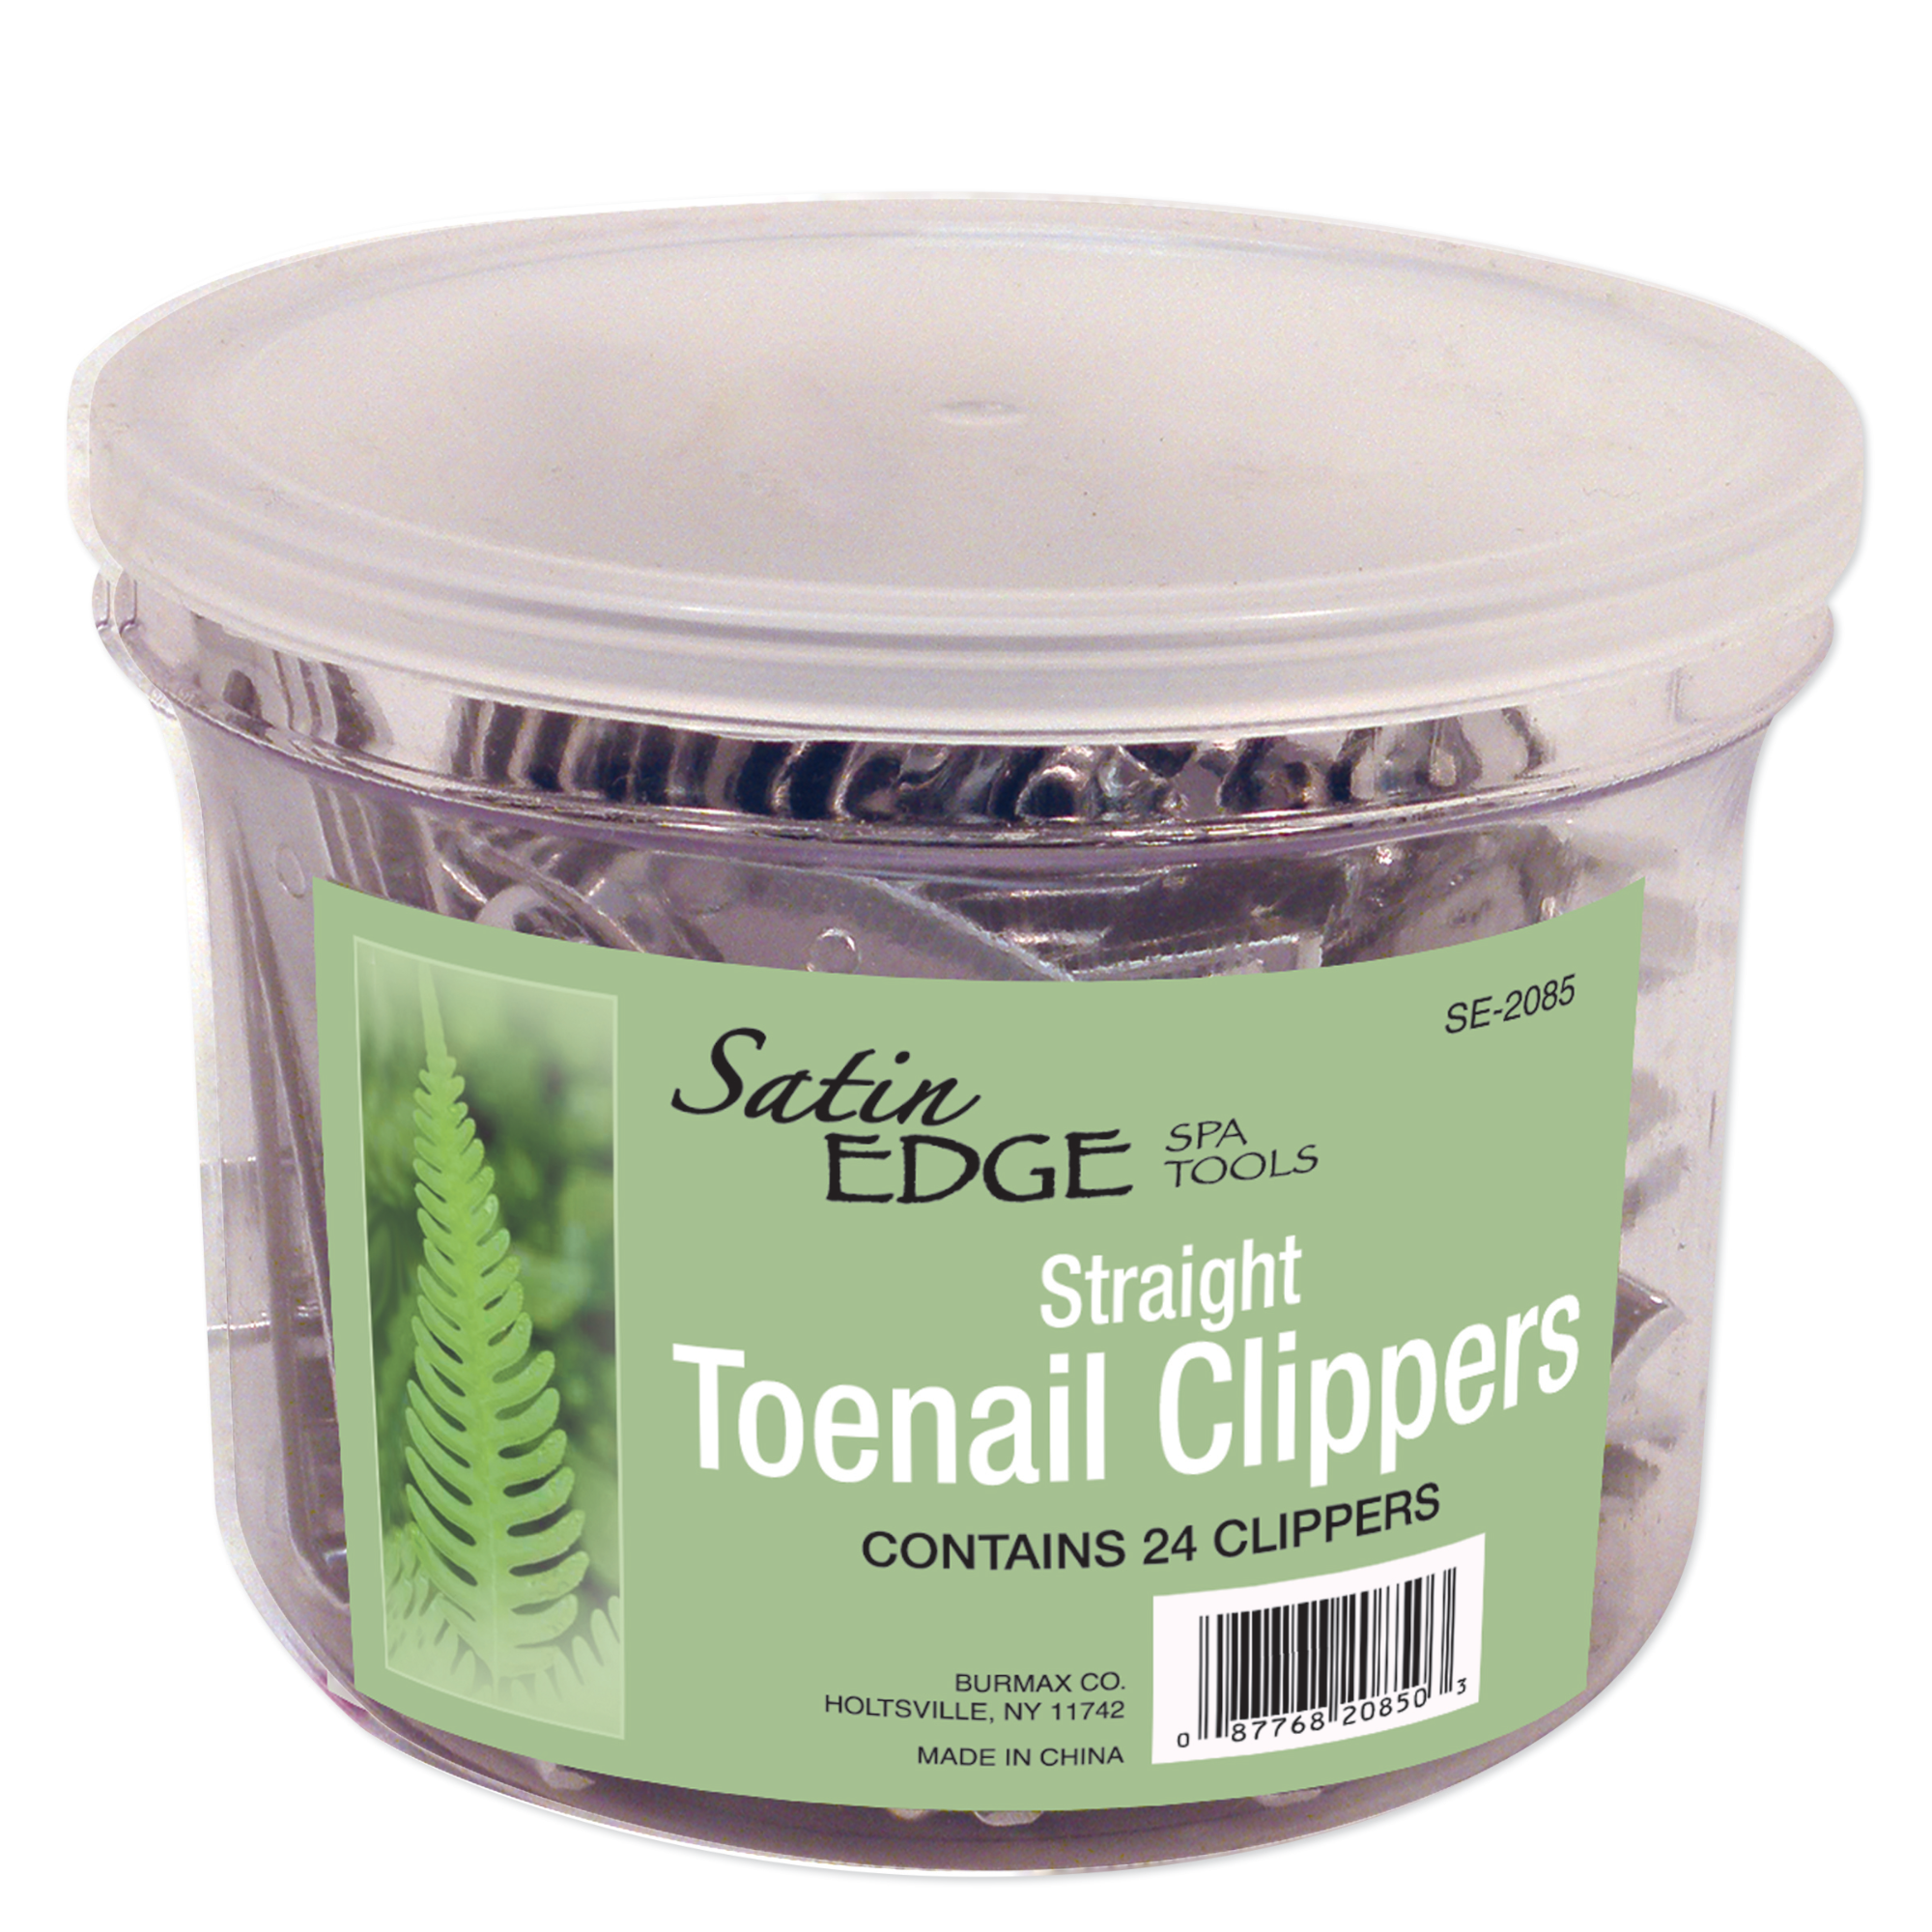 Toenail Clippers, Straight Blade - Container of 24